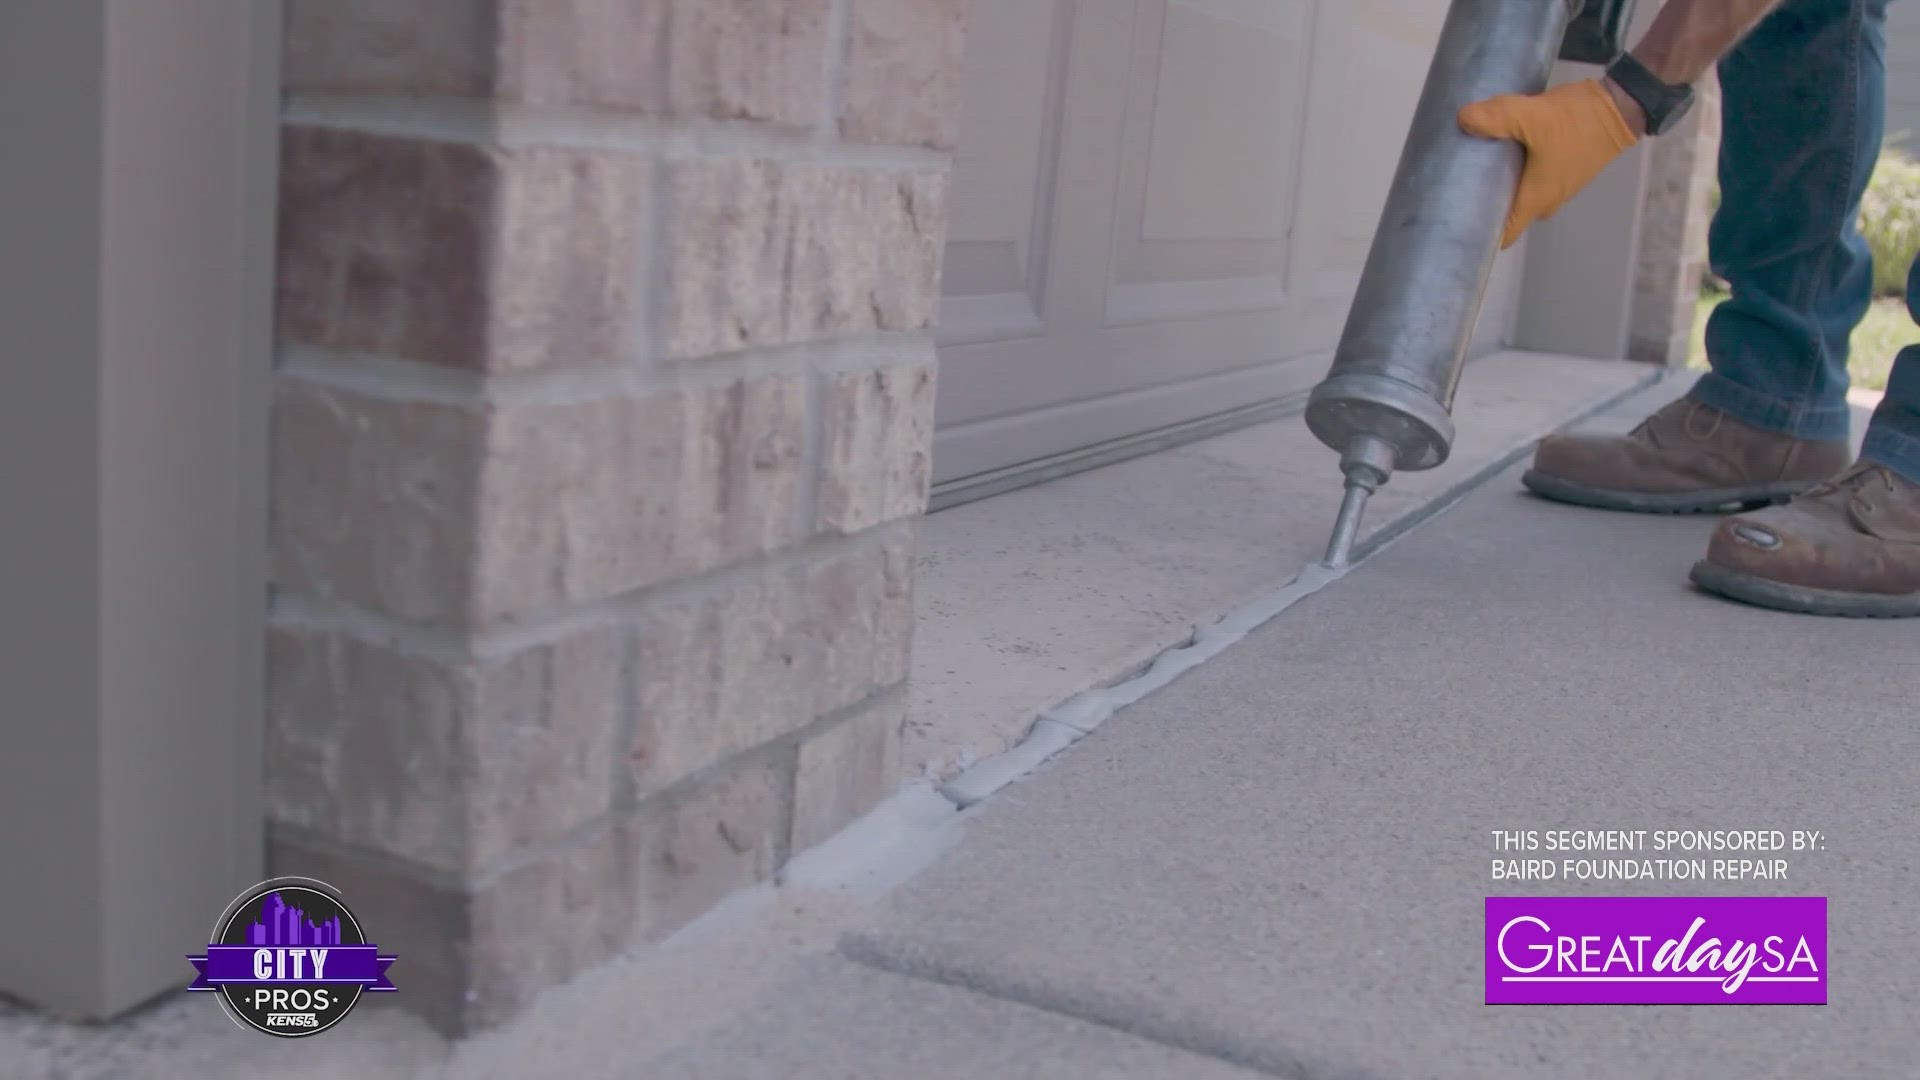 Solutions to repair your concrete needs [Sponsored by: Baird Foundation Repair]